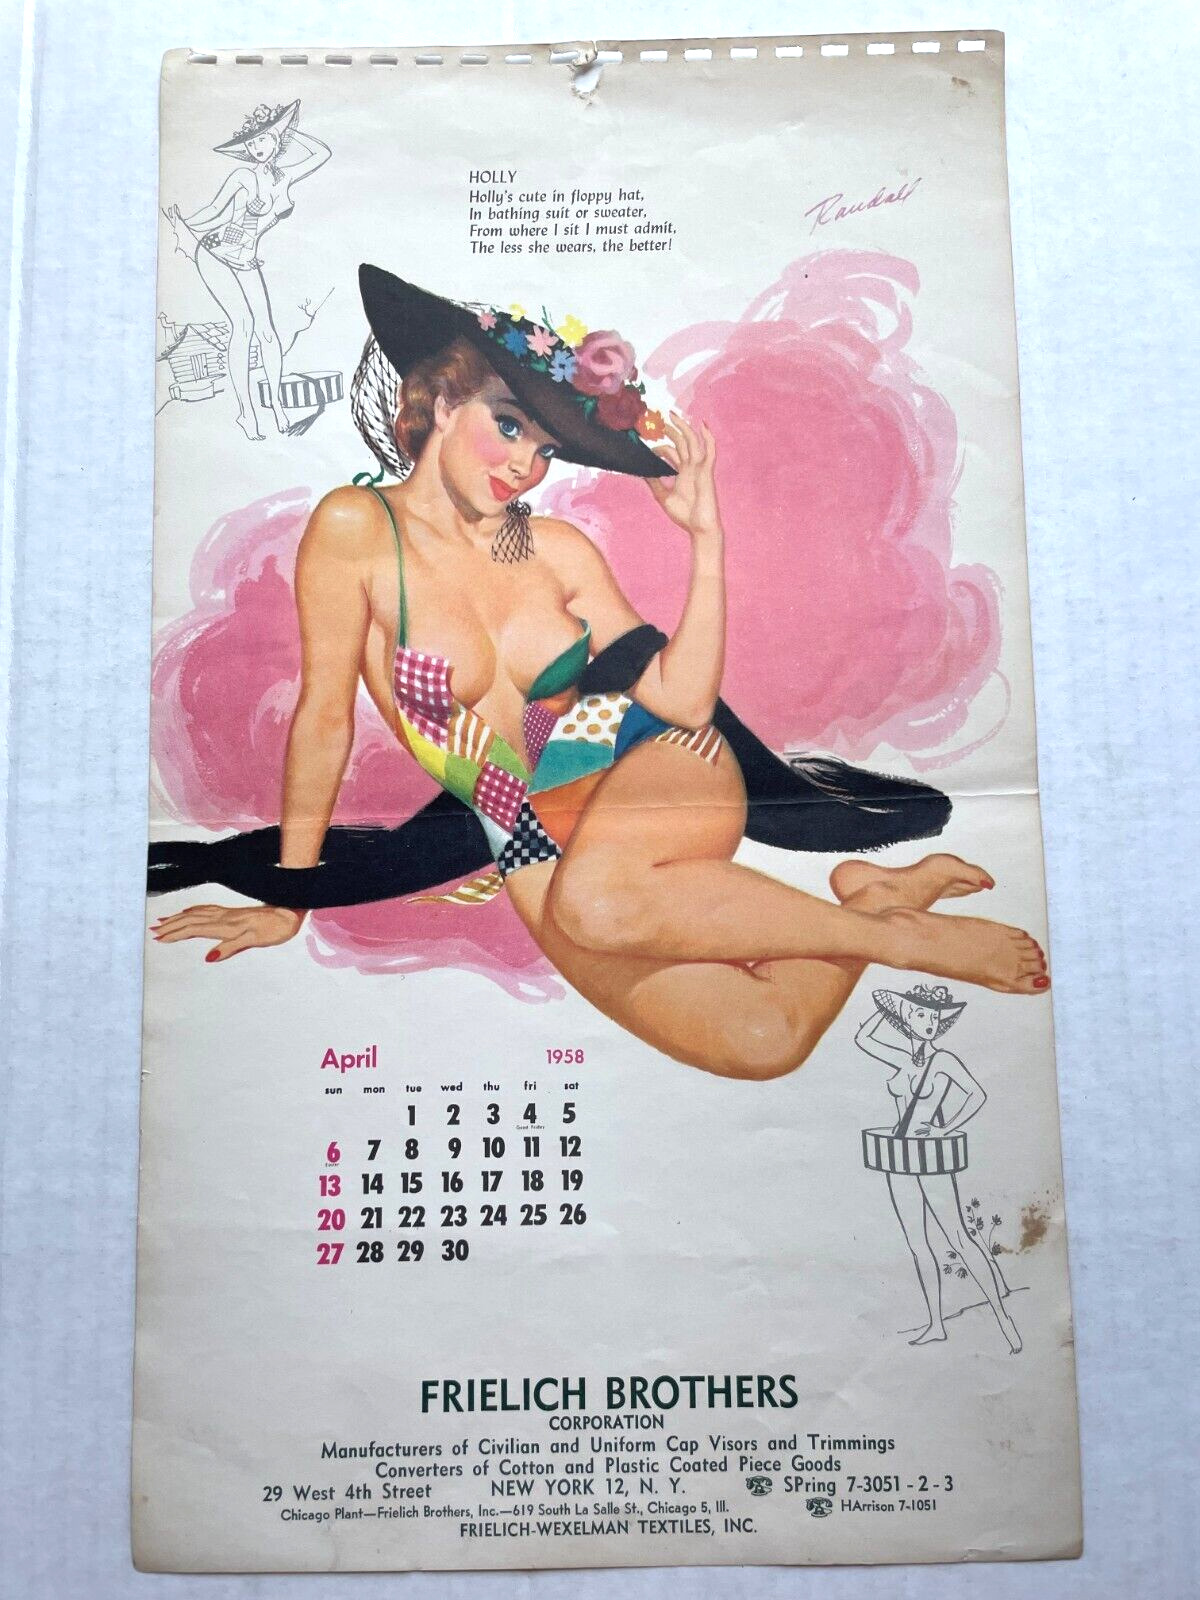 April 1958 Pinup Girl Calendar Page w/ Holly in Floppy Hat by Randall